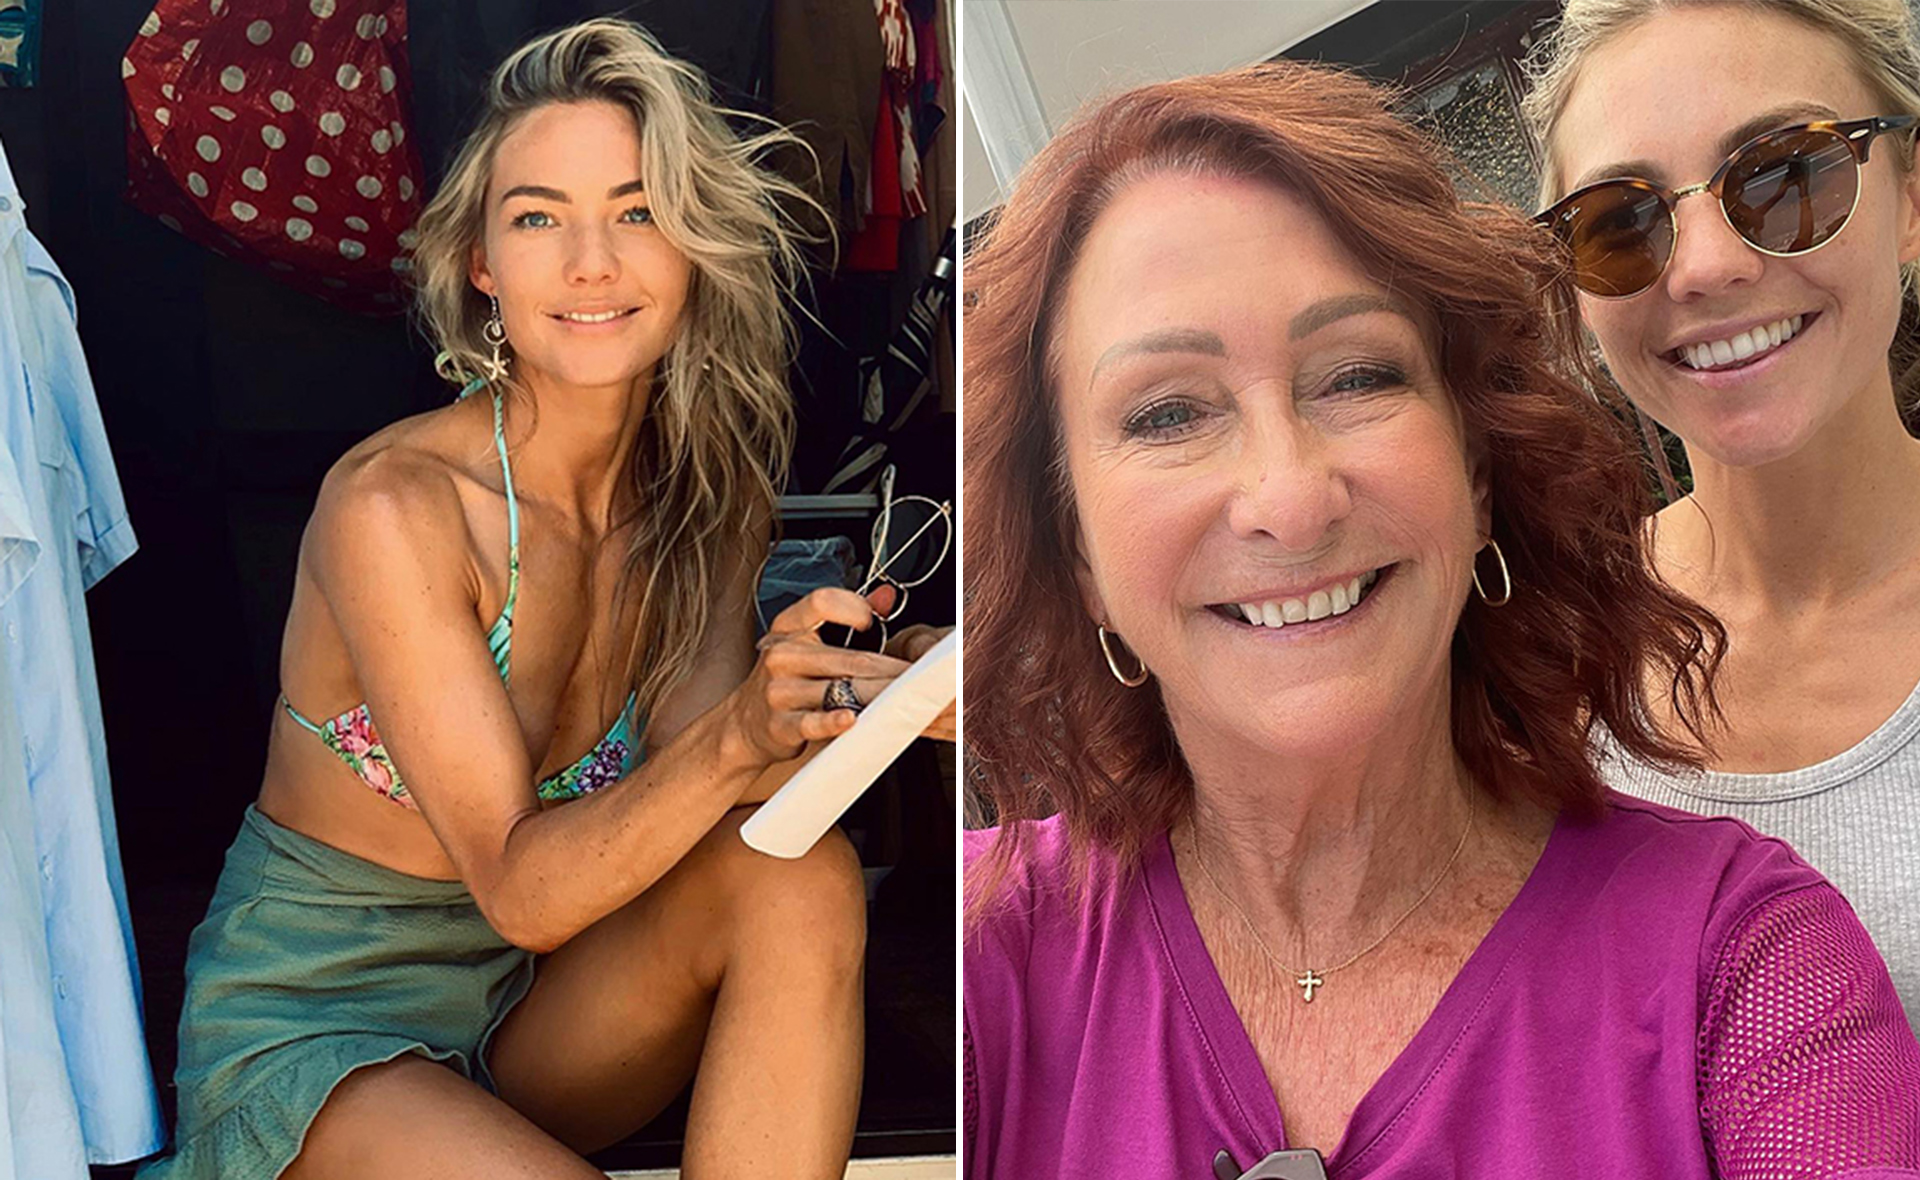 Sam Frost gets nostalgic for her Home and Away family after sharing a hilarious blooper video and reuniting with Lynne McGranger